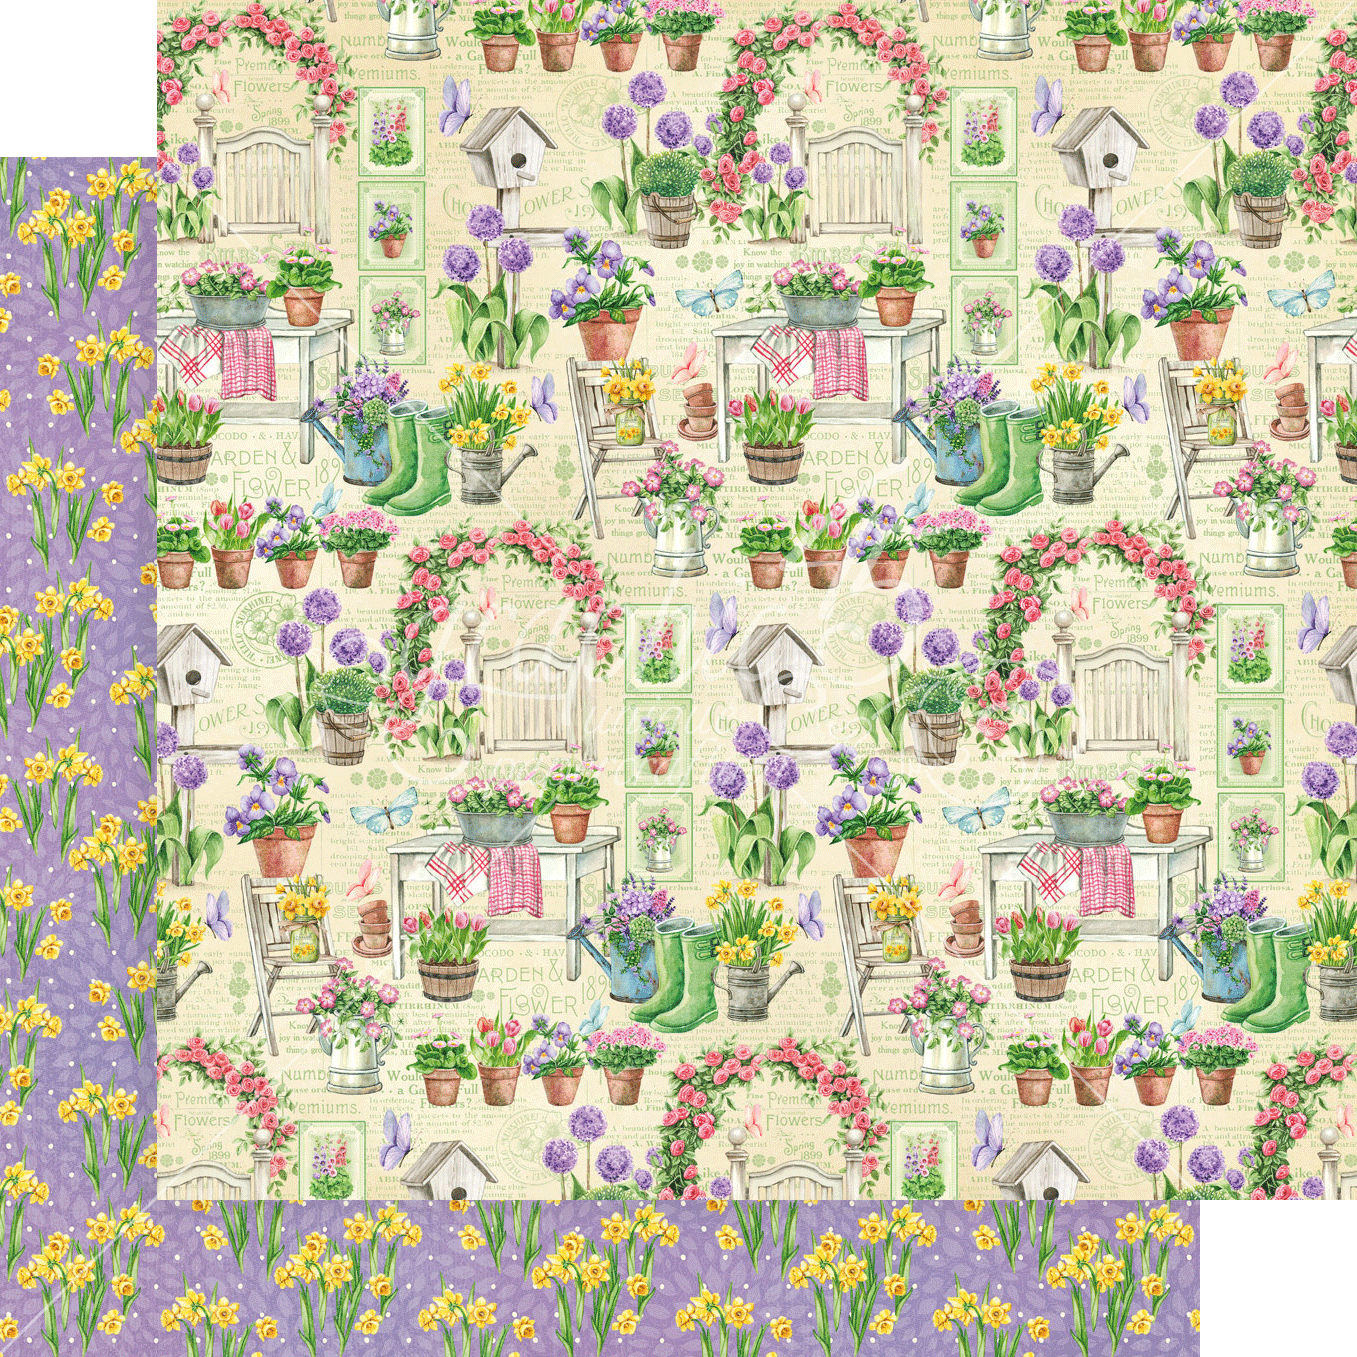 Graphic 45 Grow With Love 12X12 Tip Toe Through the Tulips